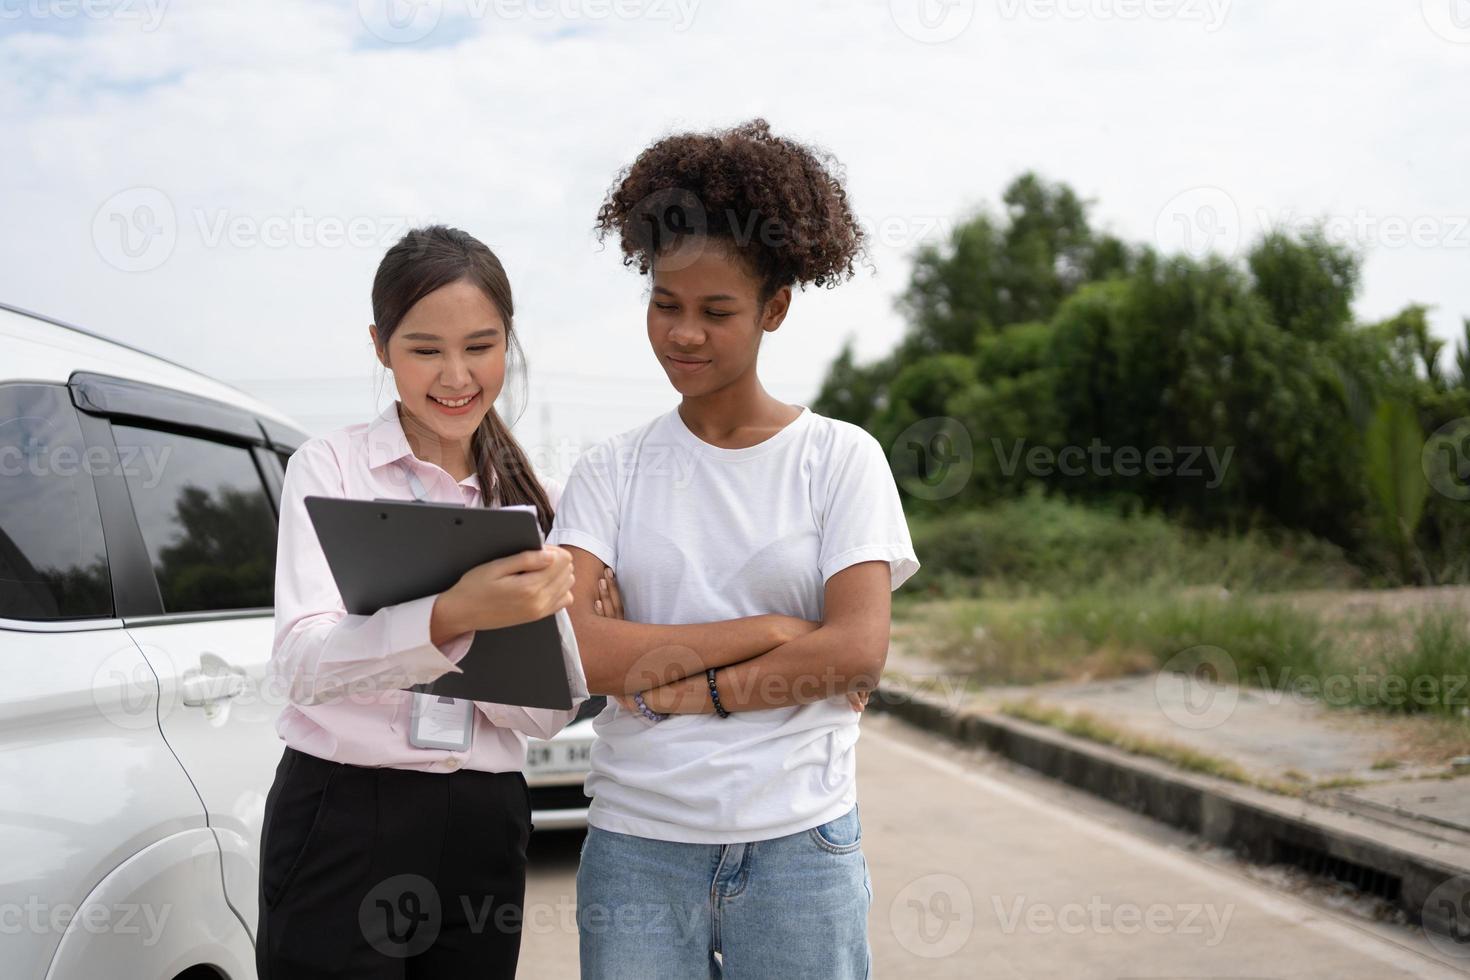 Women drivers Talk to Insurance Agent for examining damaged car and customer checks on the report claim form after an accident. Concept of insurance, advice auto repair shop and car traffic accidents. photo